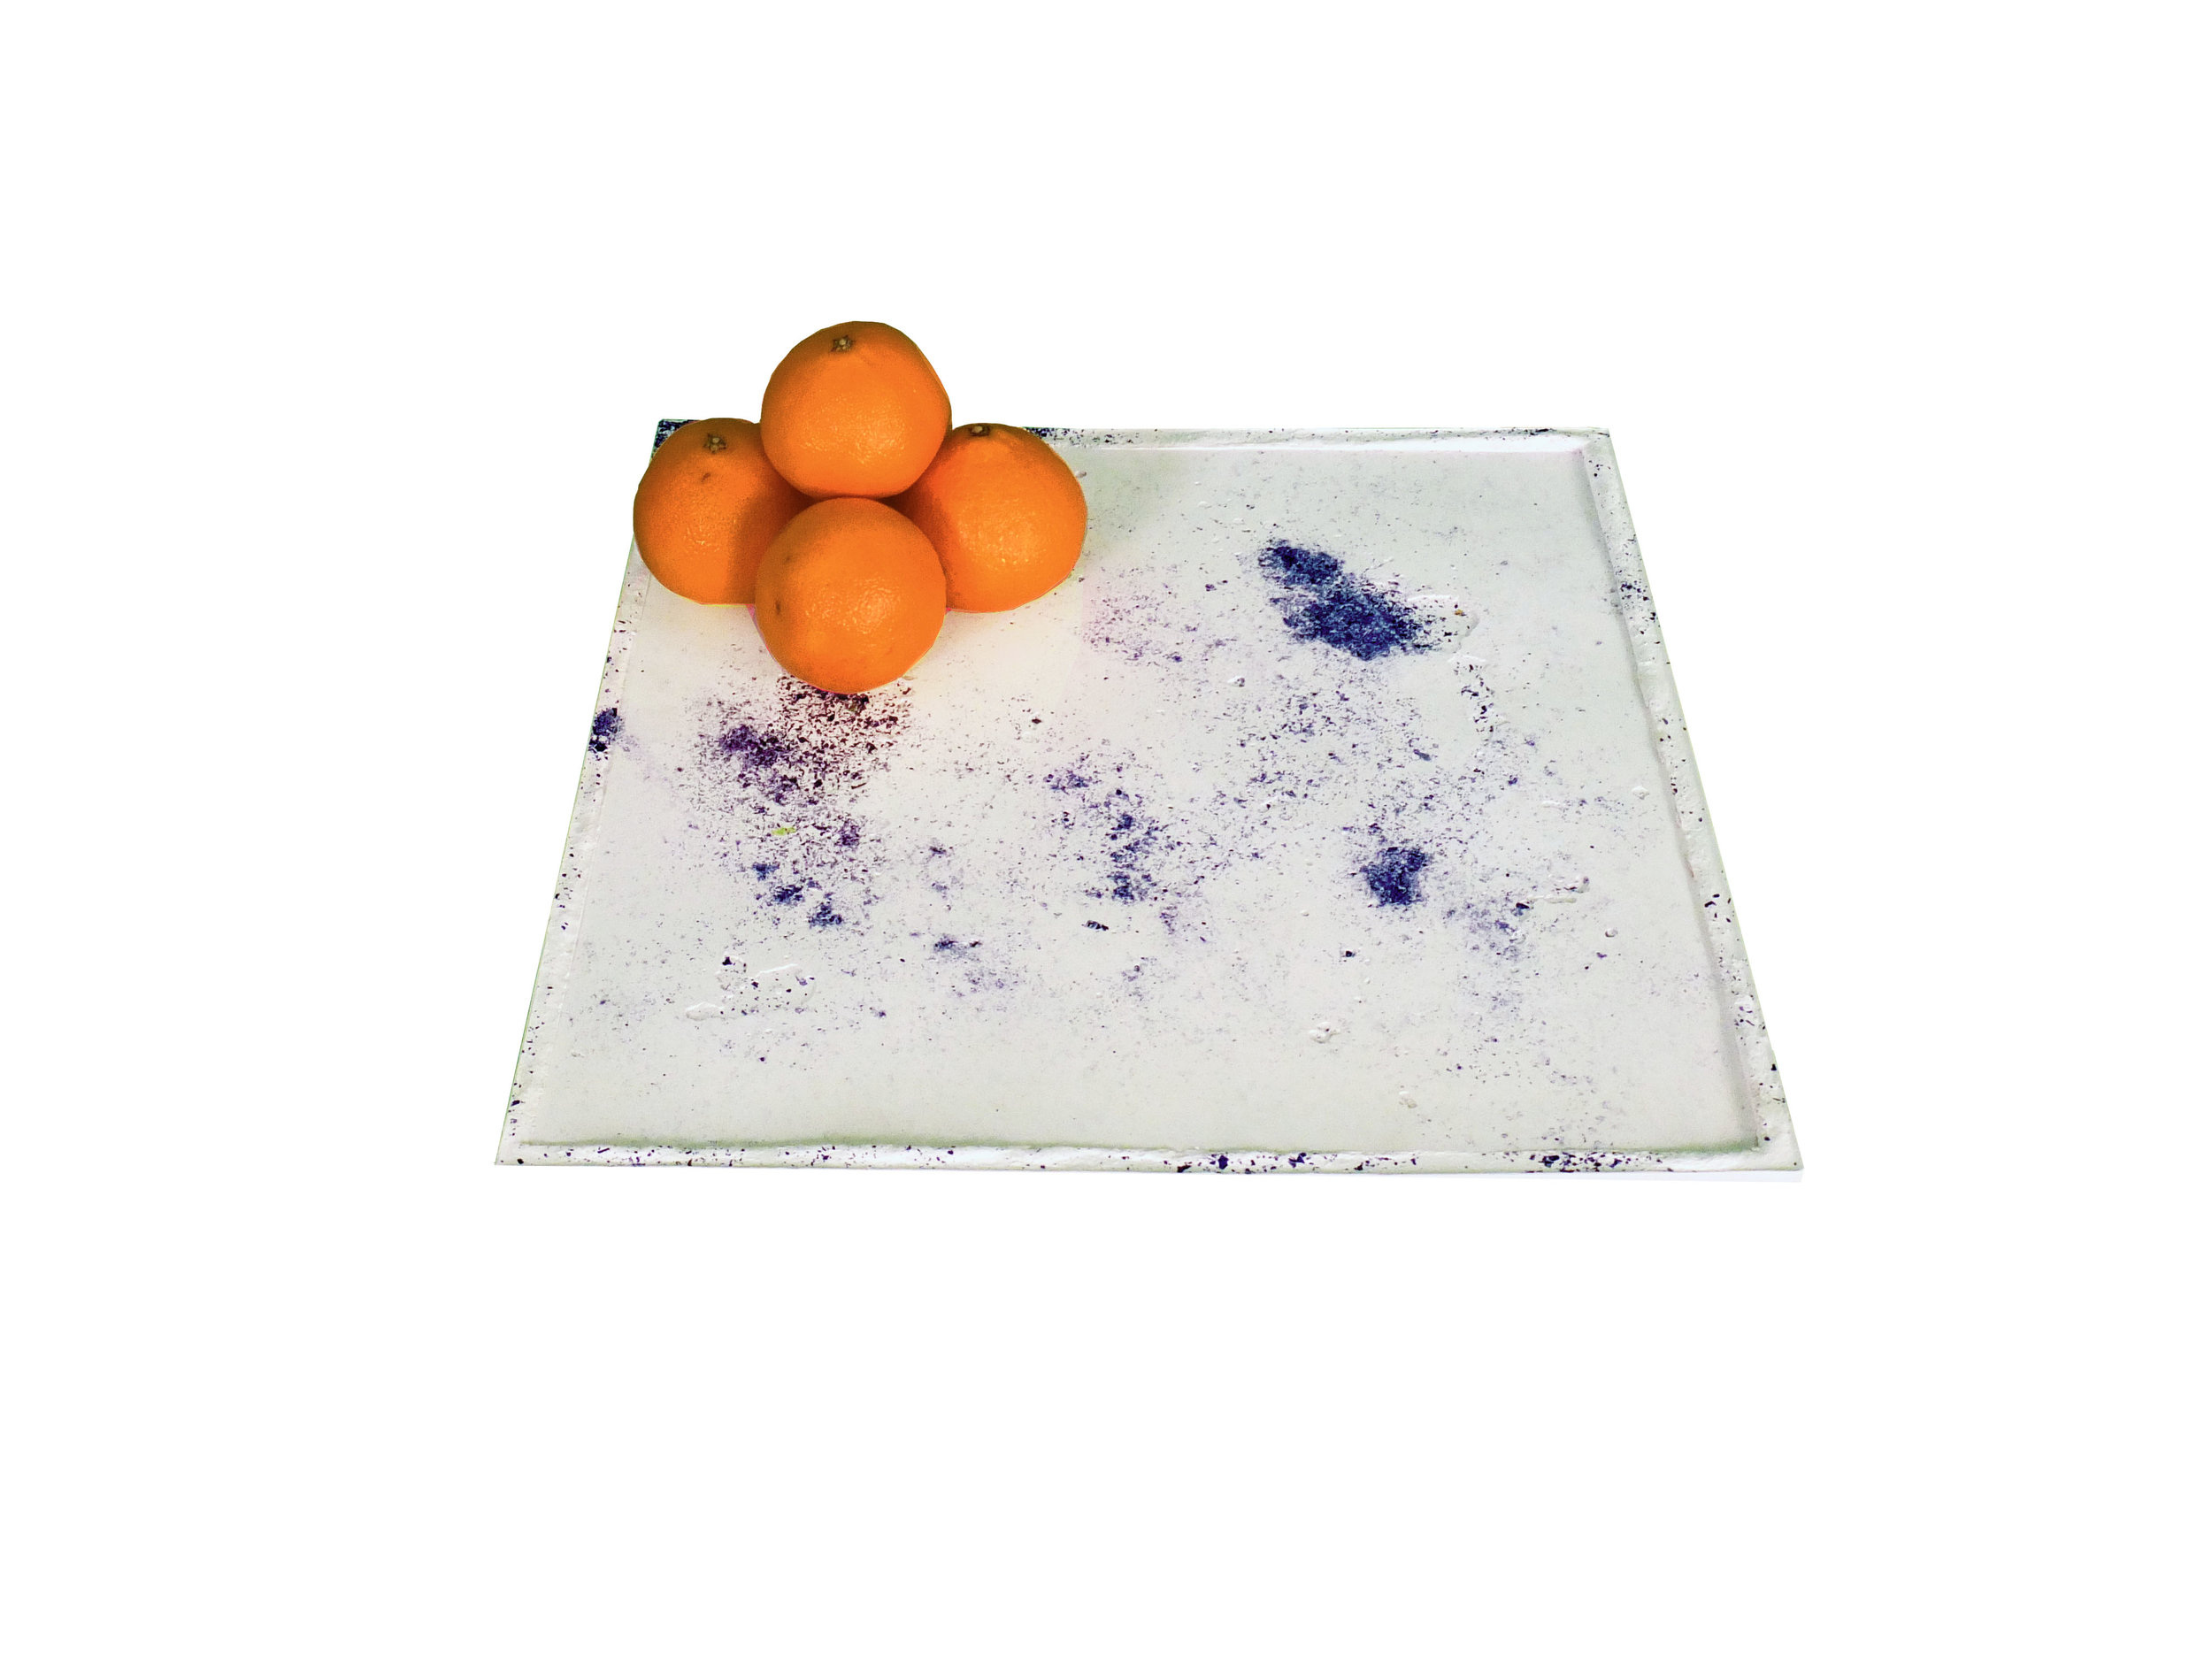 Blue concrete tray with oranges